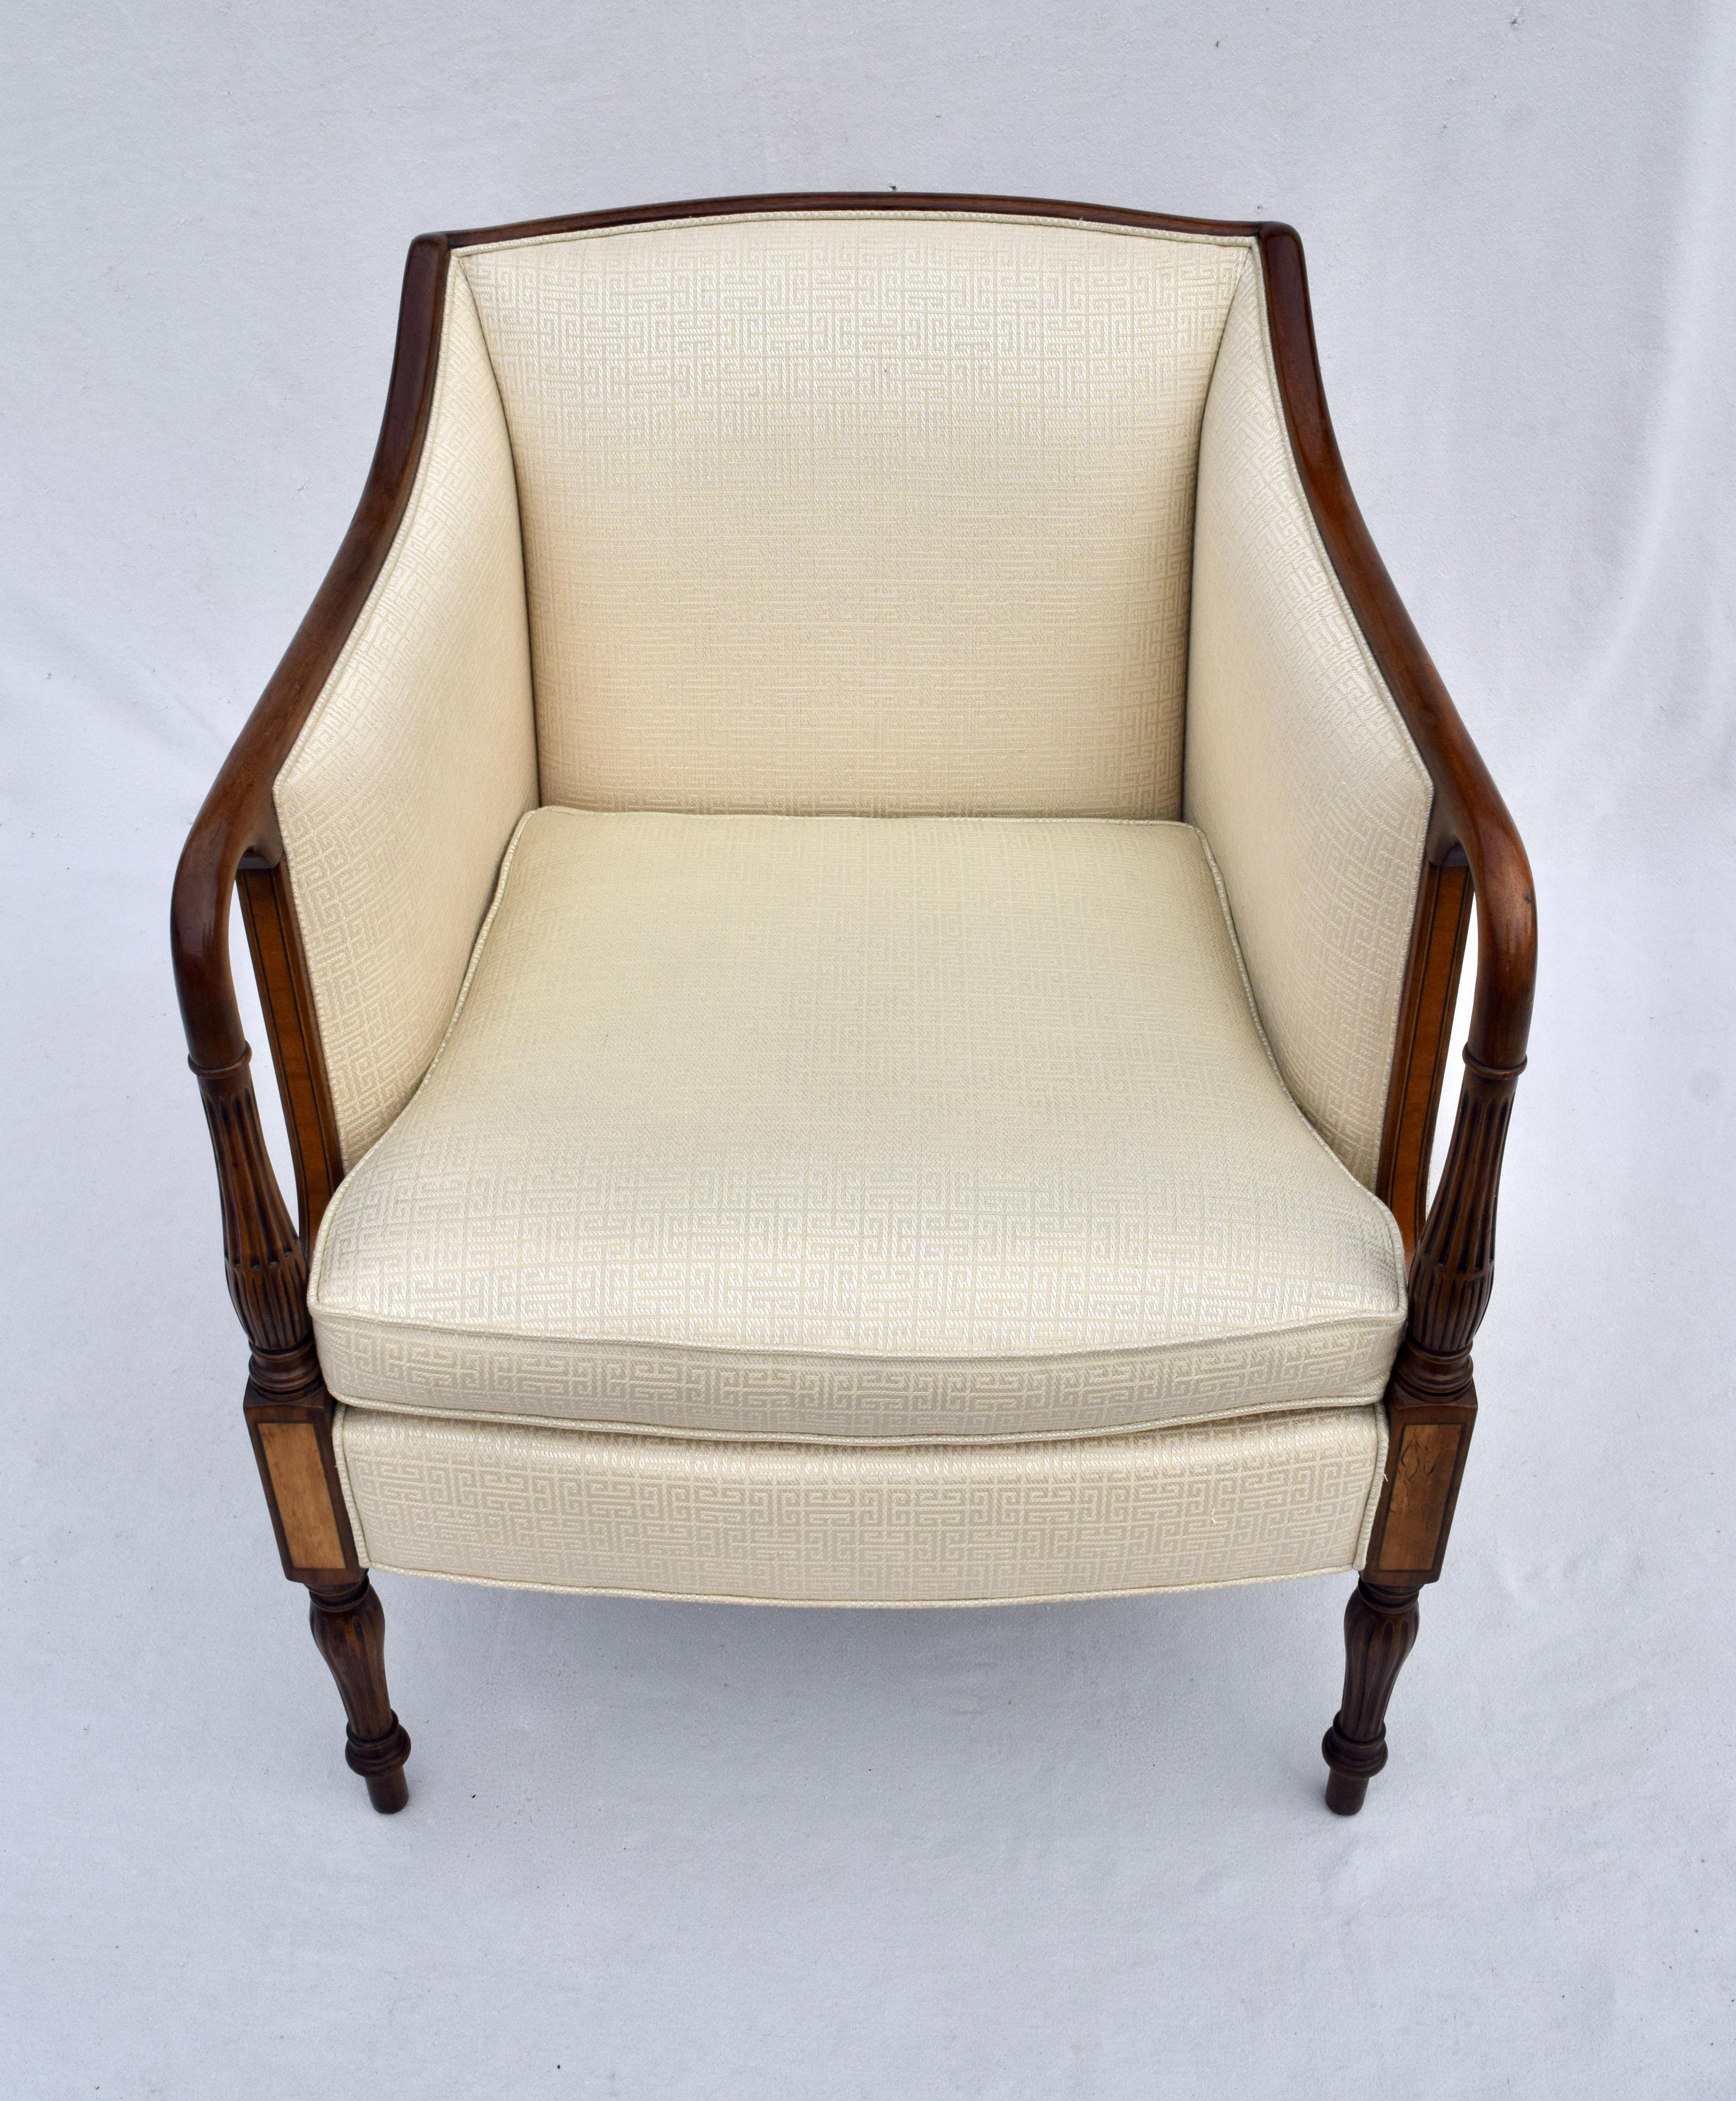 Sheraton Federal Style Upholstered Inlaid Club Chairs by Southwood Hickory, NC 2